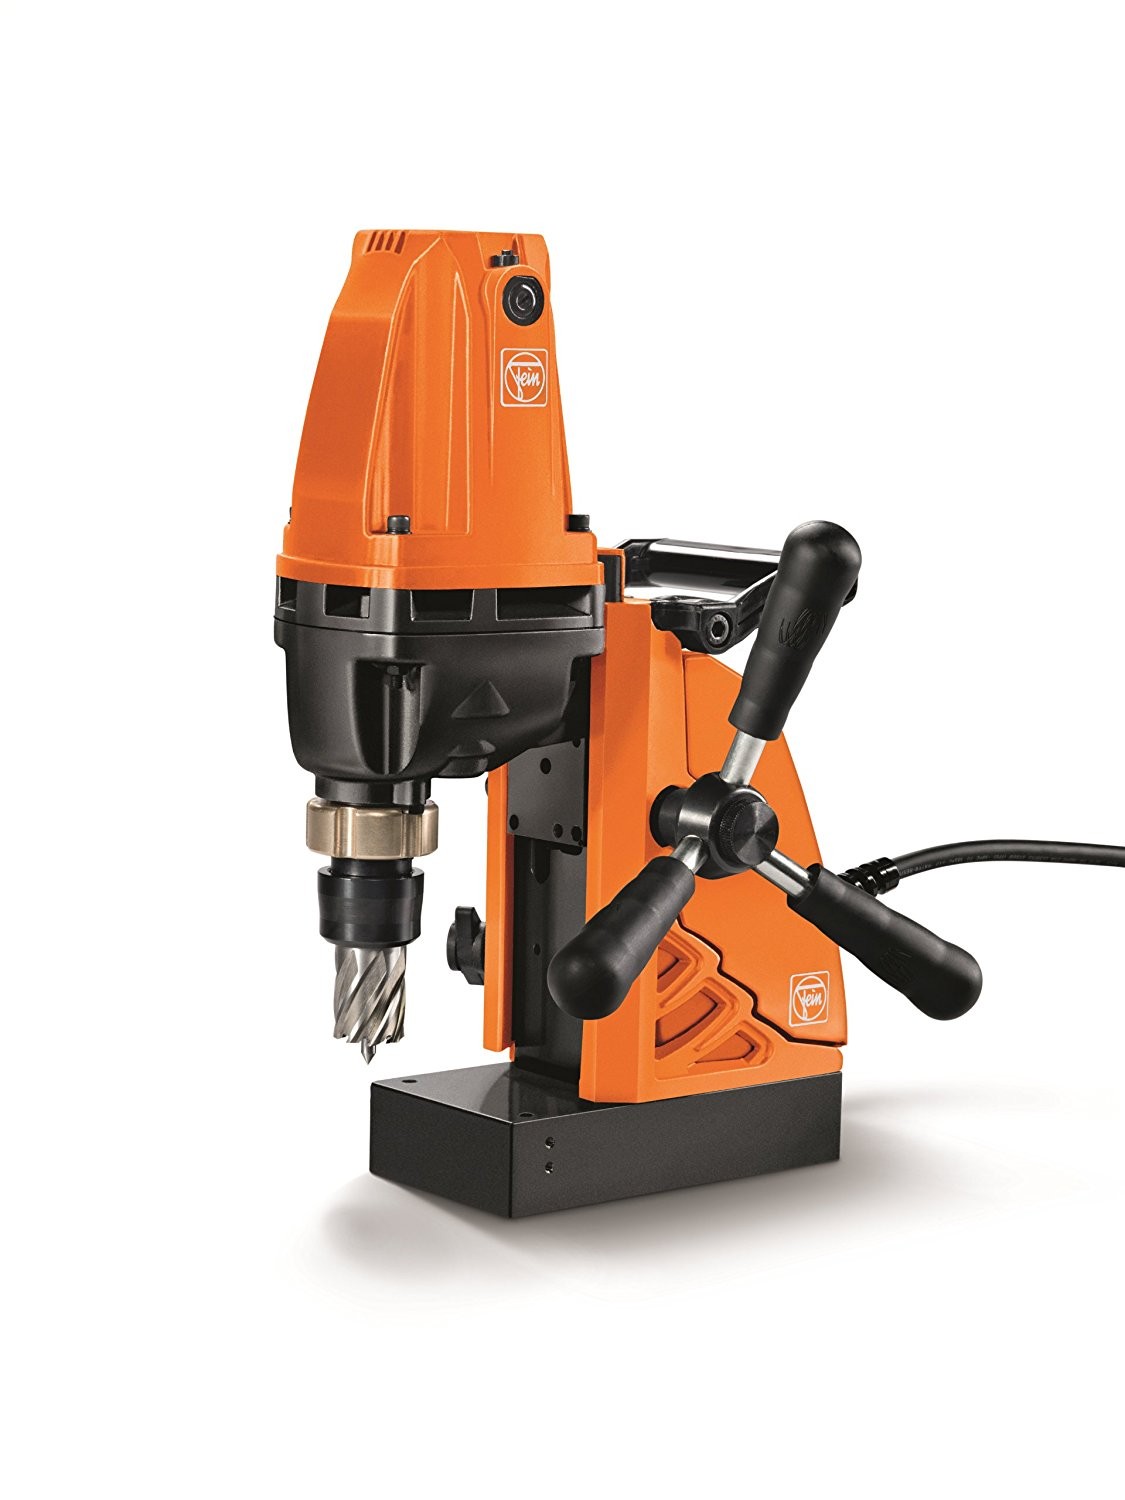 Jancy drill press review